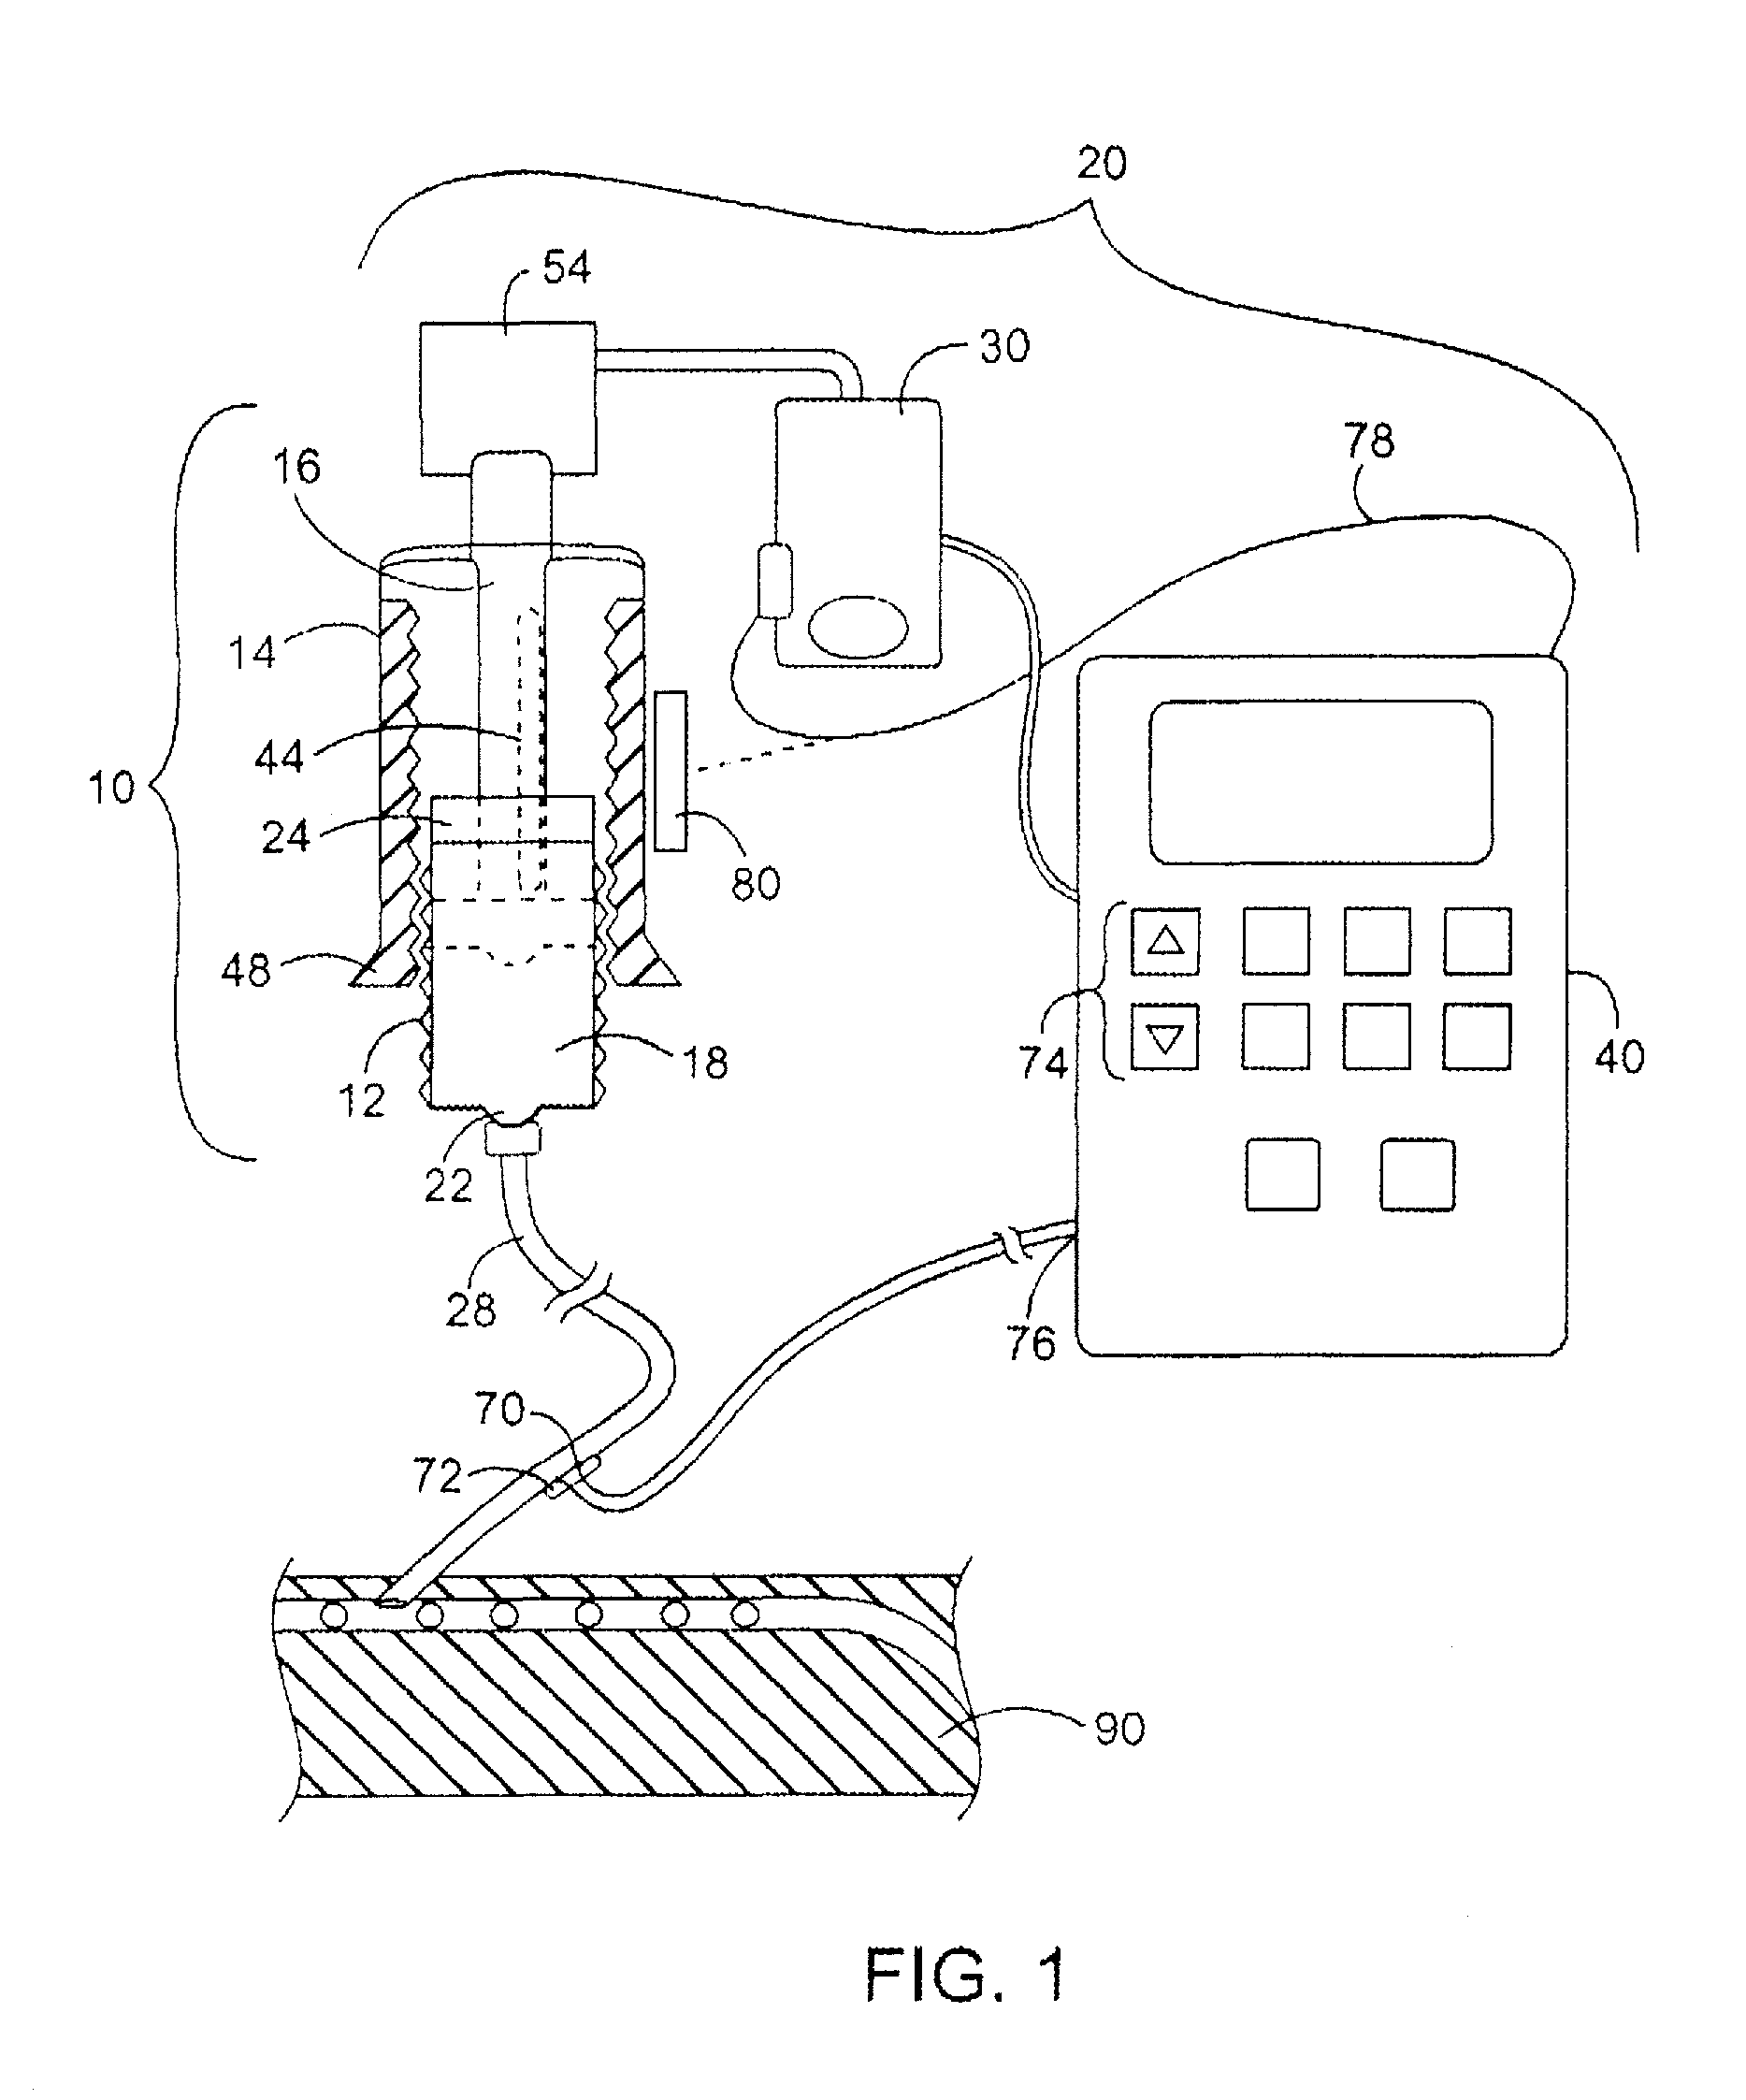 Medical infusion device producing adenosine triphosphate from carbohydrates